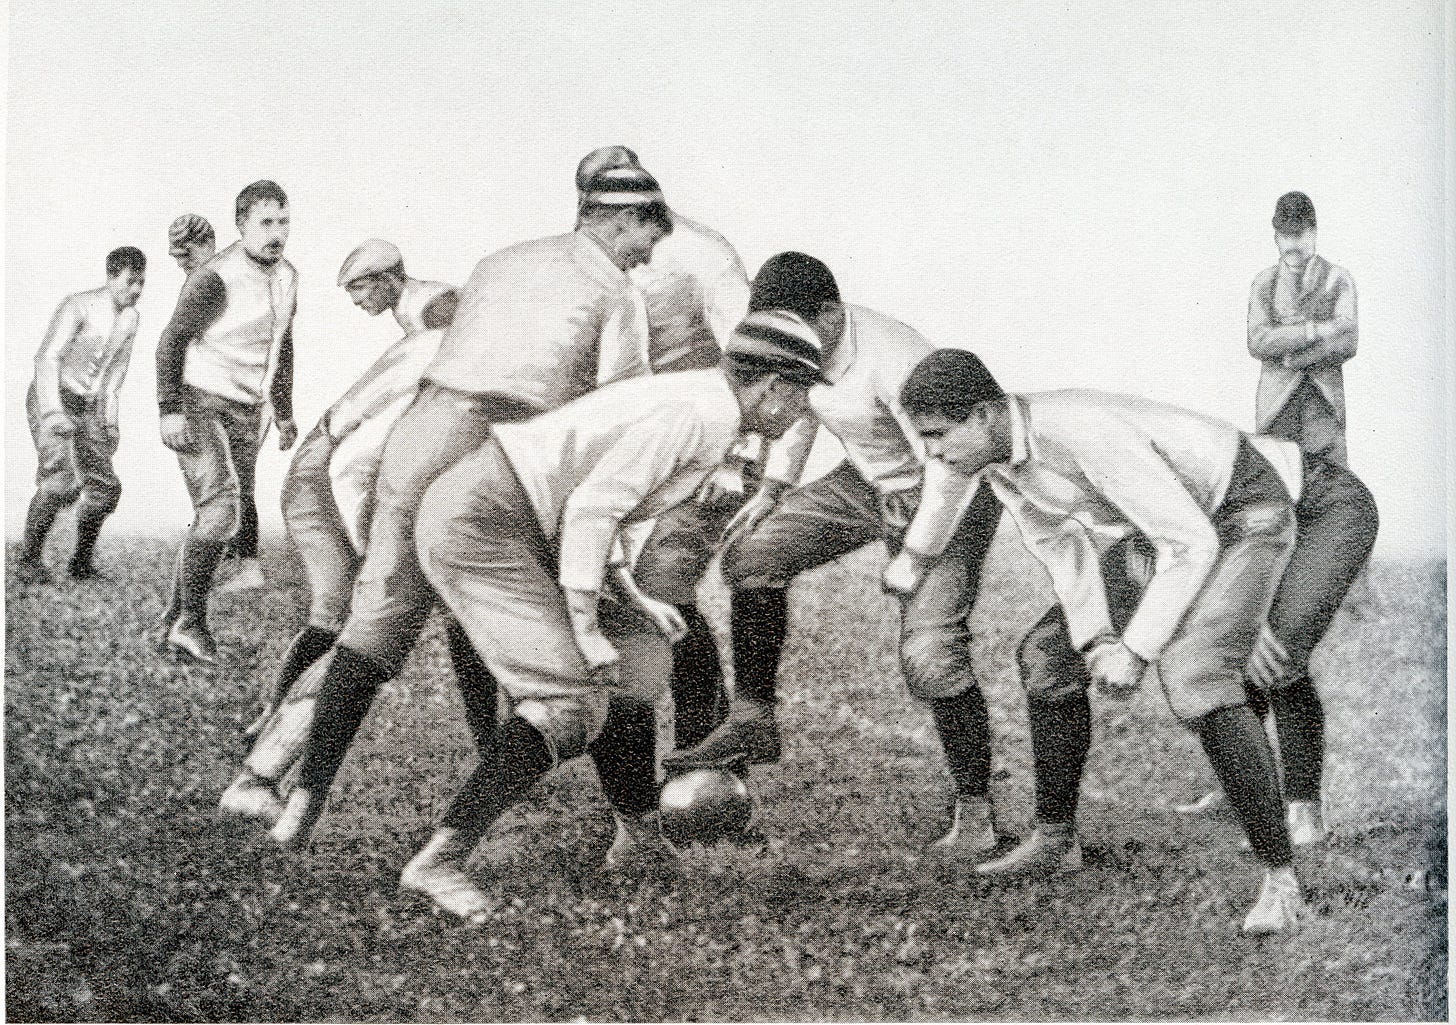 Center snapping ball with his foot in early 1880s.